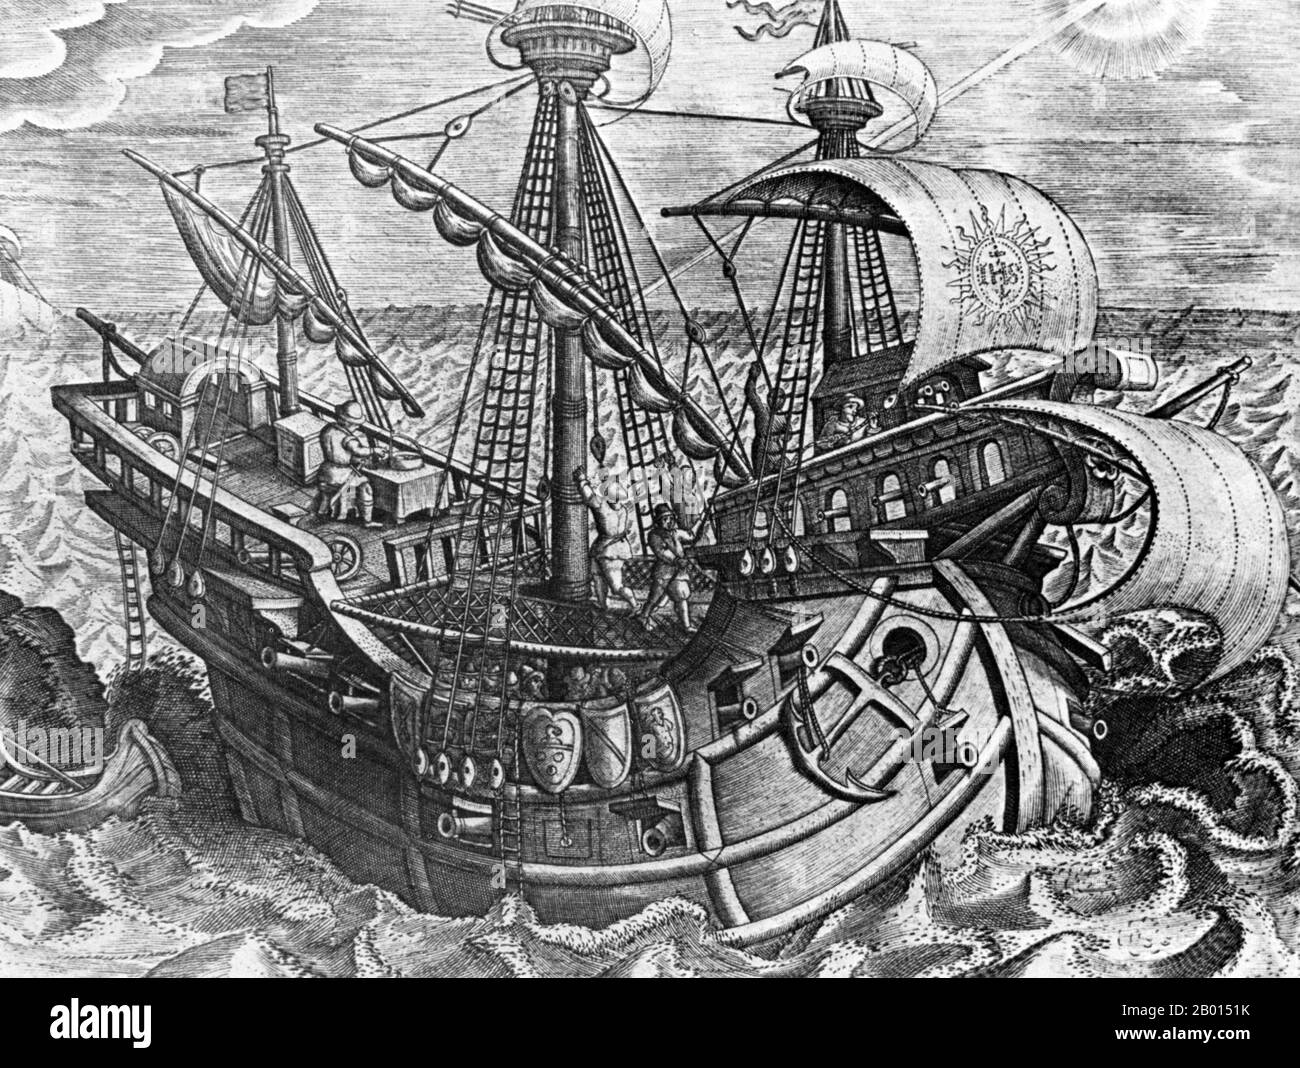 Spain/Americas: A Spanish carrack on an Atlantic expedition in the early 1500s, searching for a route to the Pacific. Note the pilot on the top deck taking a sight with a sextant. Engraving by Johannes Stradanus (1523-1605), c. 1600.  Ferdinand Magellan, or Fernão de Magalhães, (c. 1480–1521) was a Portuguese explorer. He was born in Sabrosa, in northern Portugal, but later obtained Spanish nationality in order to serve King Charles I of Spain in search of a westward route to the ‘Spice Islands’ (modern Maluku Islands in Indonesia). Stock Photo